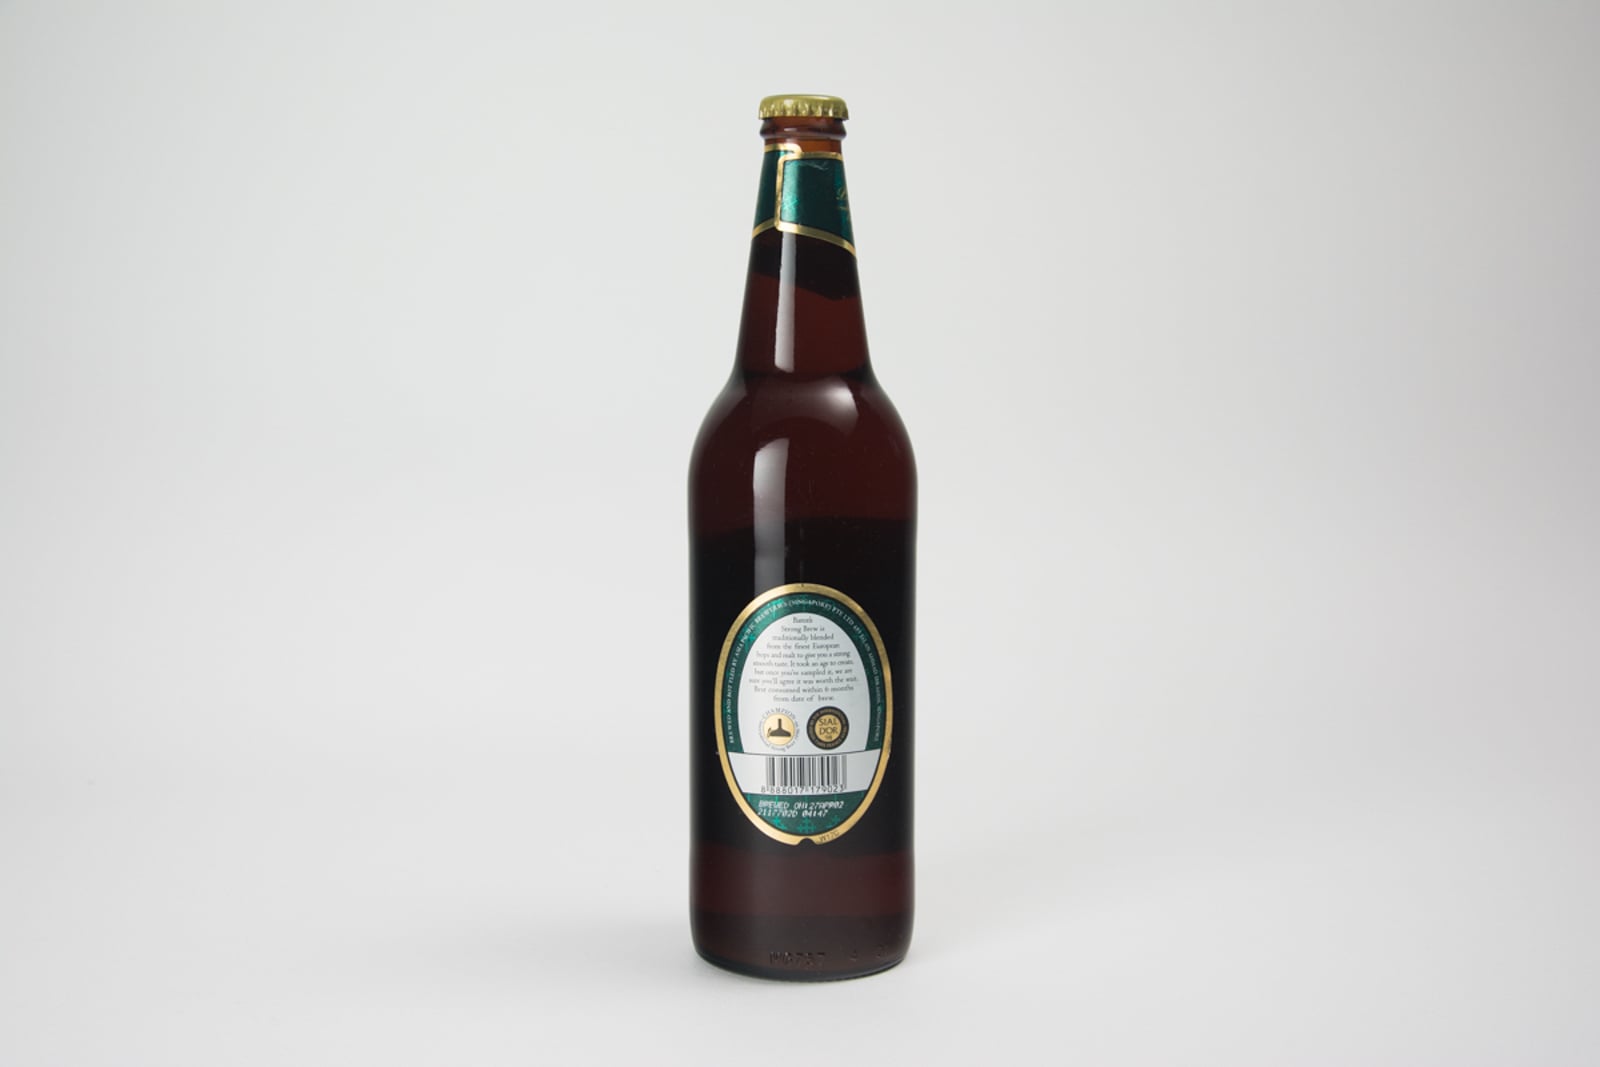 Baron's Strong Brew Beer Bottle, 640 ml